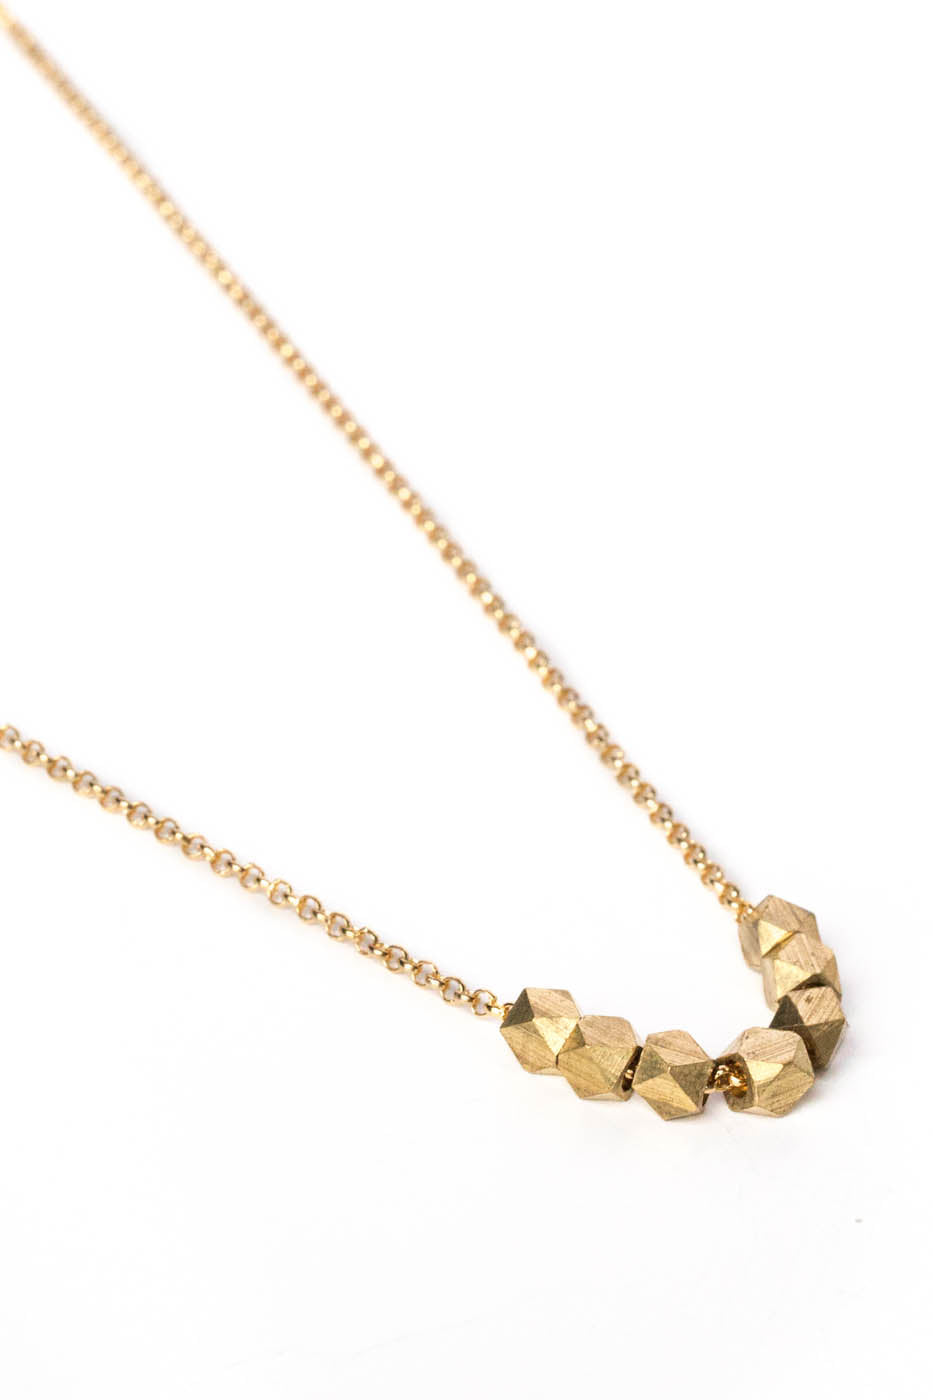 Small Gold Geometric Bead Necklace on Gold Chain